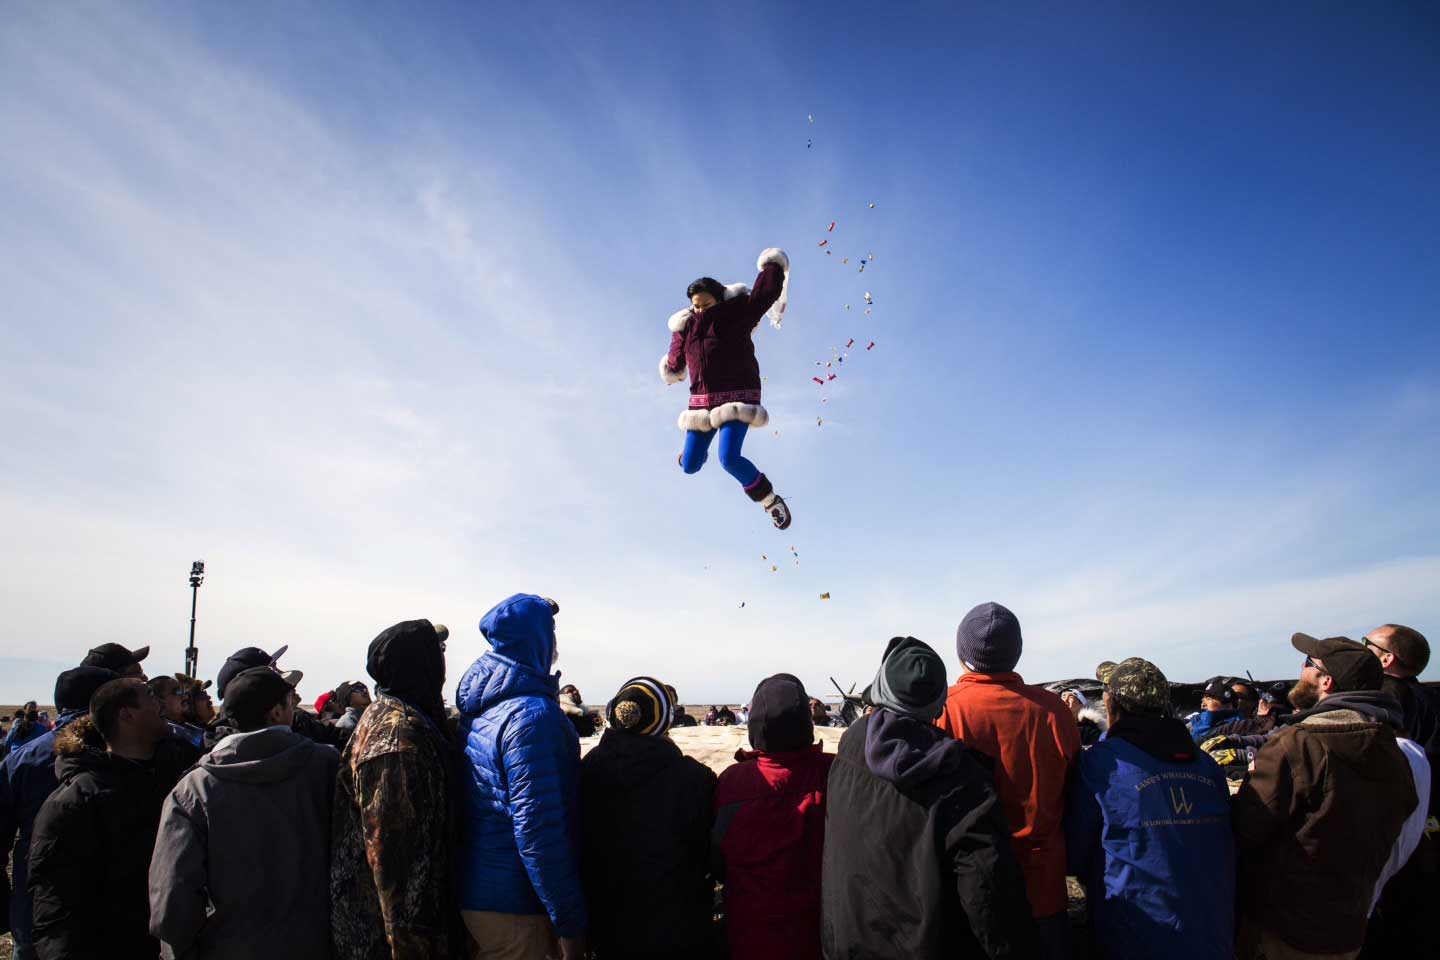 The traditional blanket toss at the annual whaling feast in Point Hope, Alaska on June 16, 2015. (Katie Orlinsky)